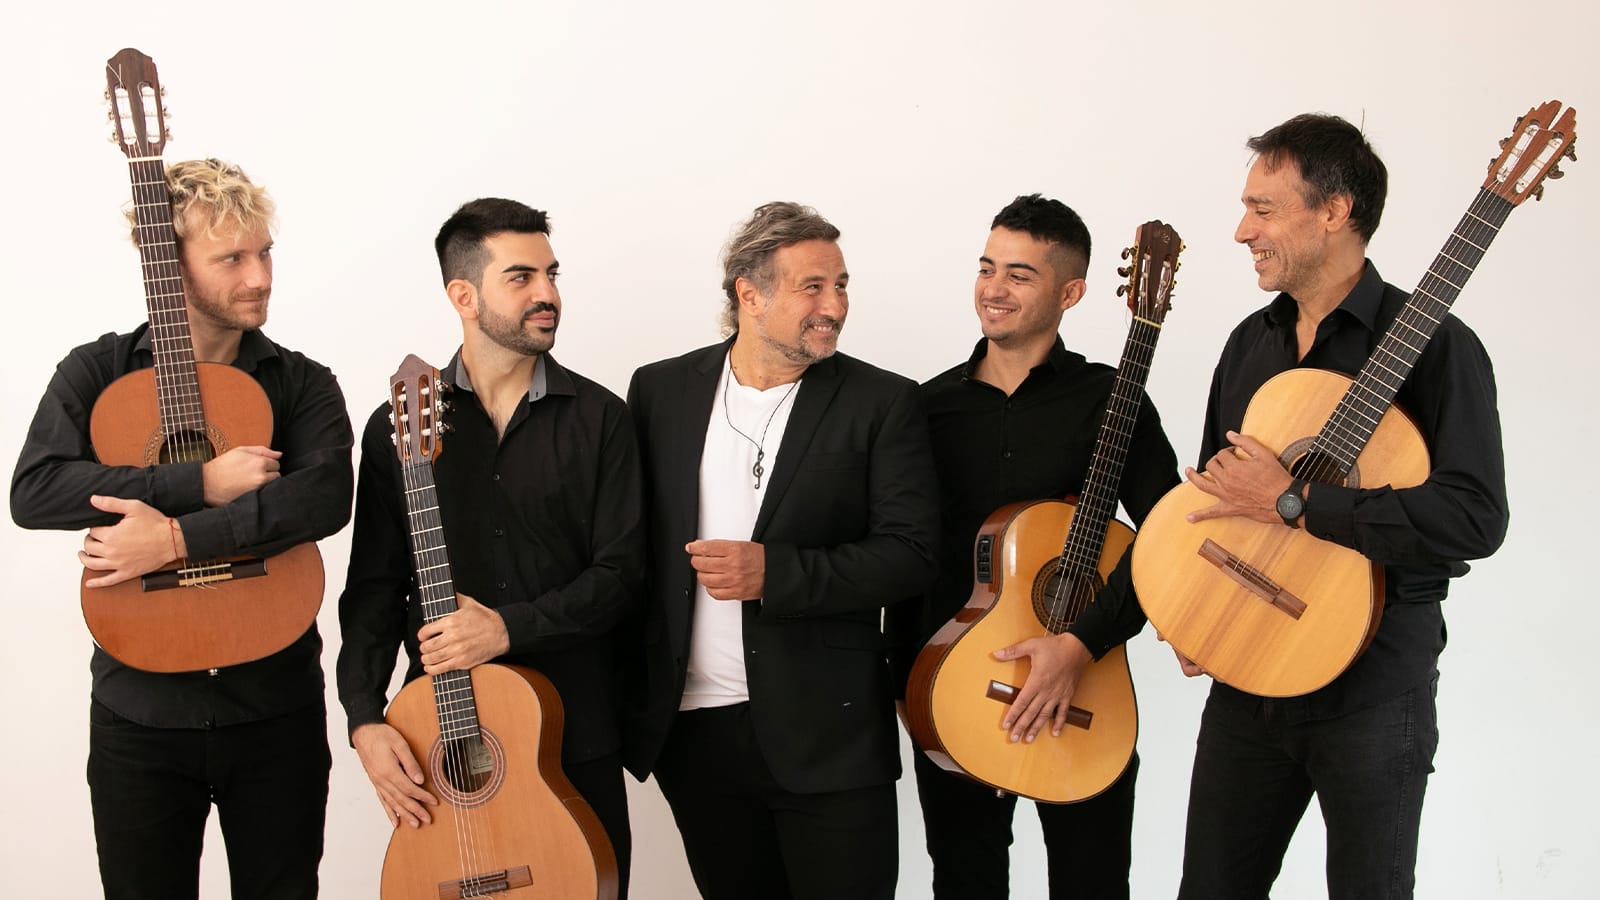 A group of men in suits hold spanish guitars